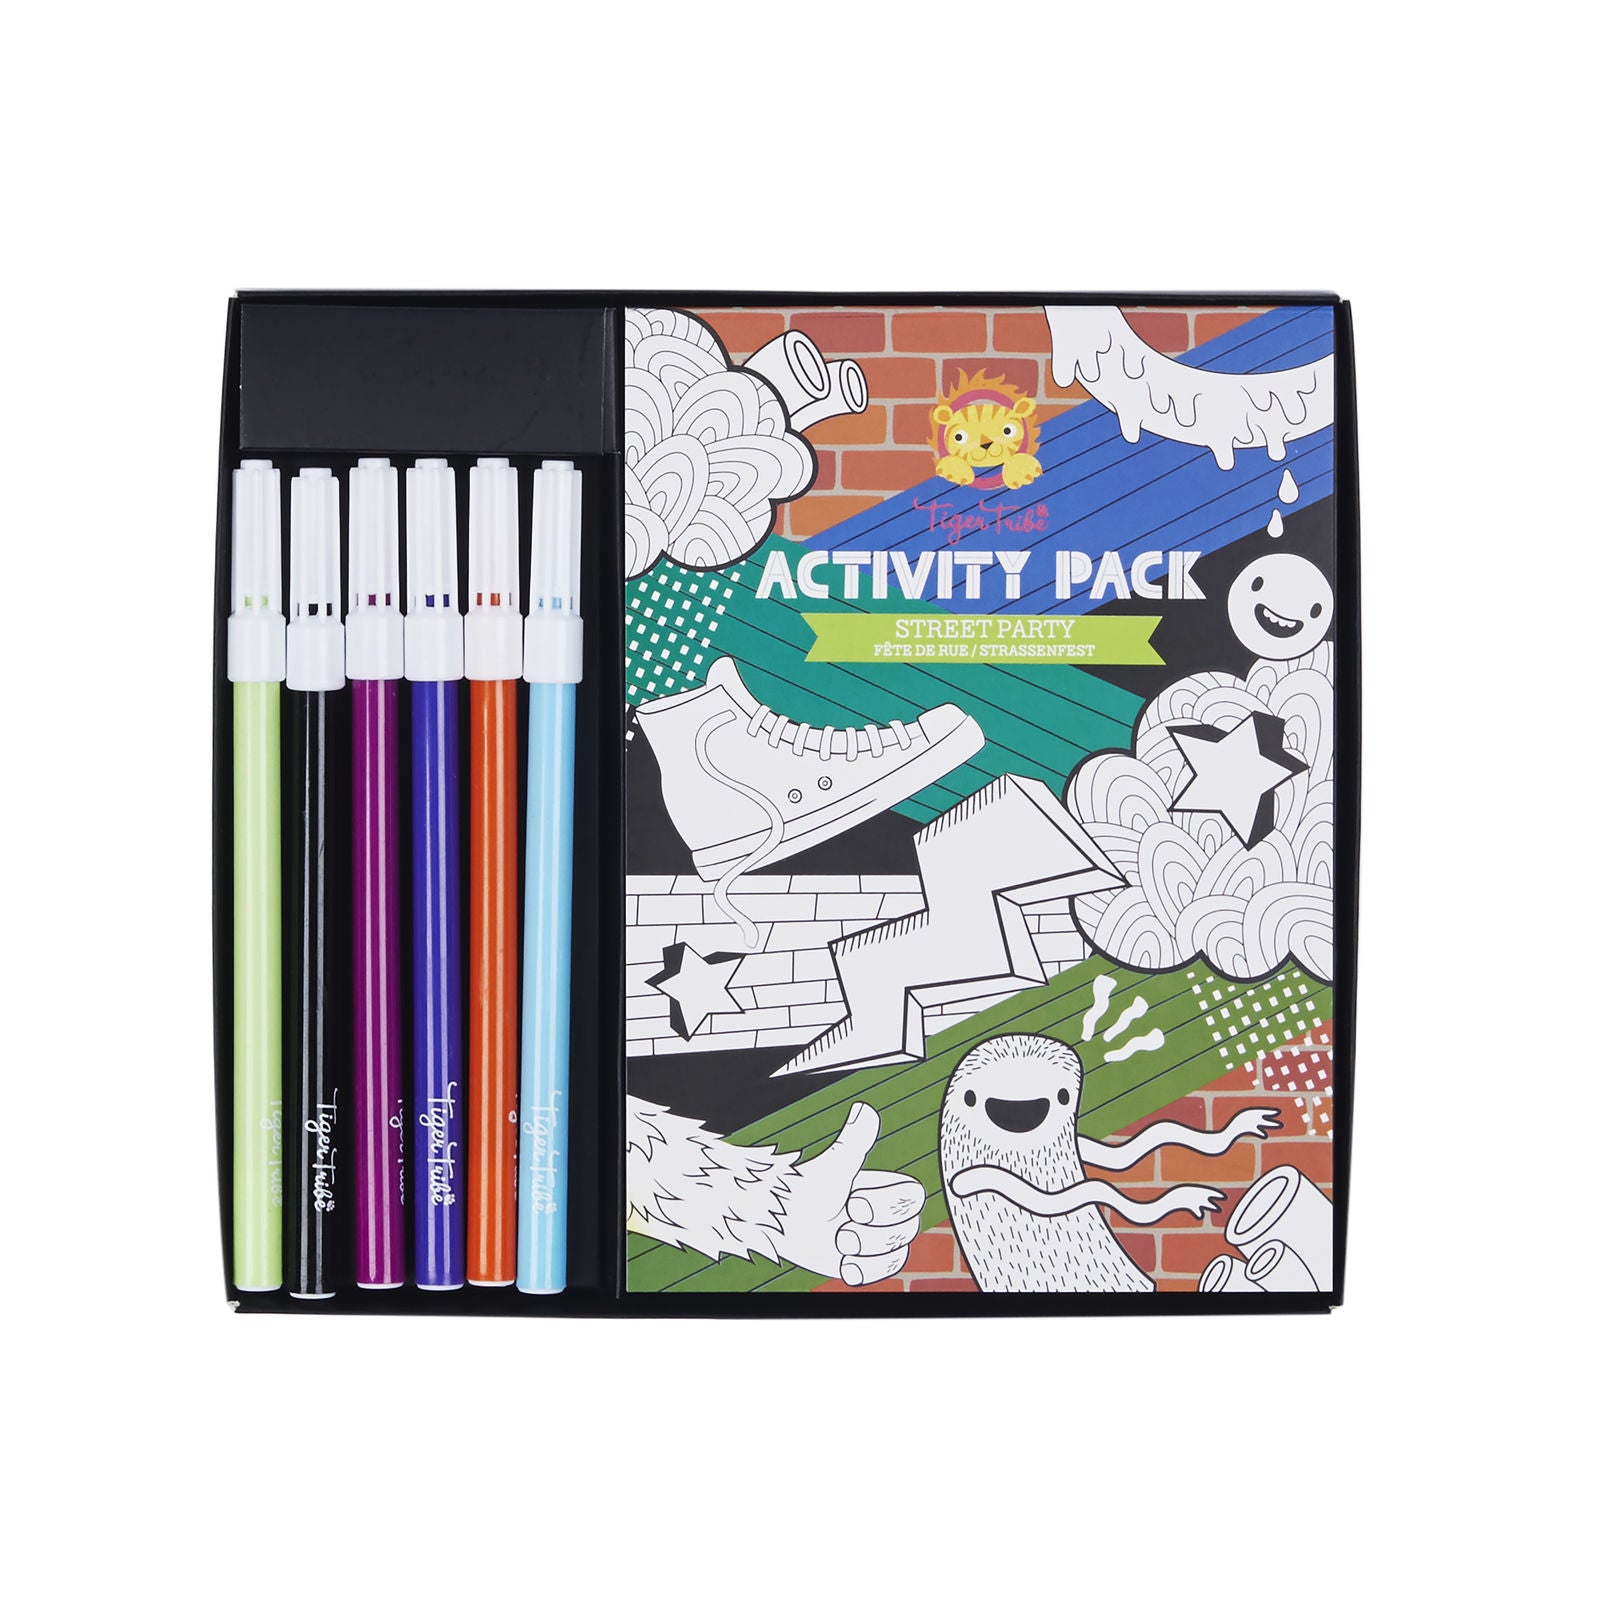 street-party-activity-pack-2